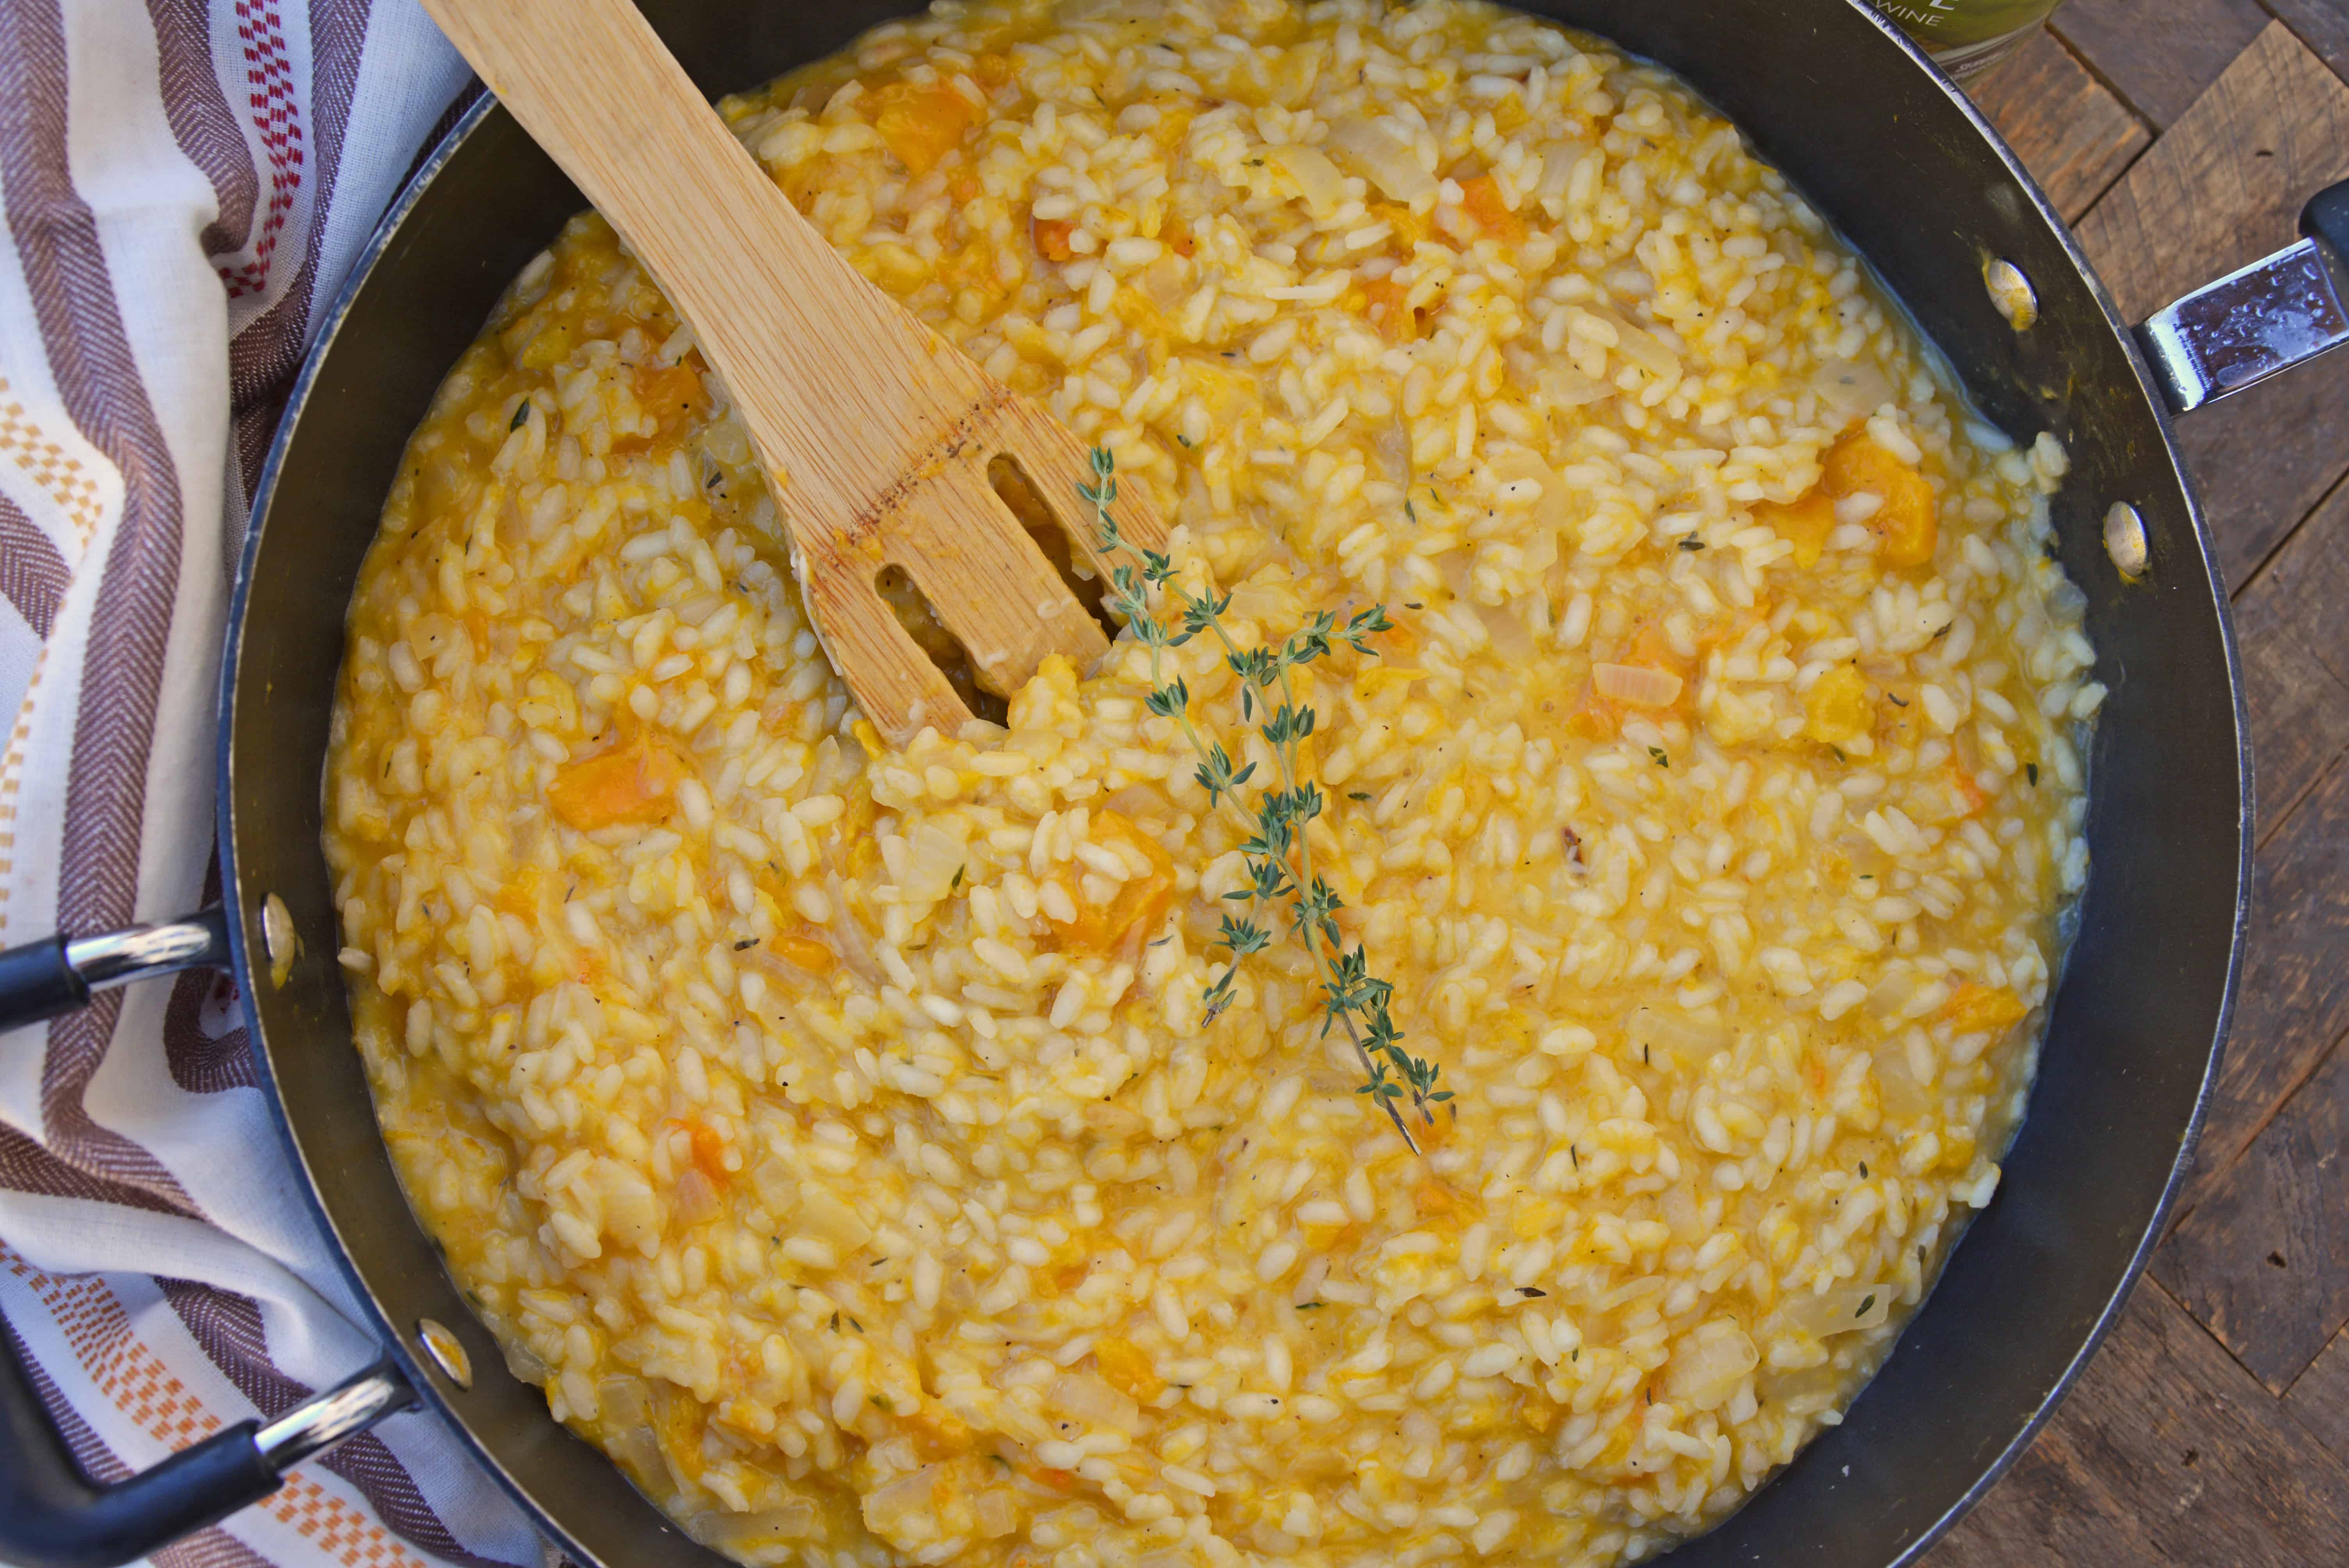 Butternut Squash Risotto is an easy side dish or entrée made with Arborio rice, crisp white cooking wine, sweet roasted butternut squash and fresh thyme. #risottorecipes #butternutsquash www.savoryexperiments.com 